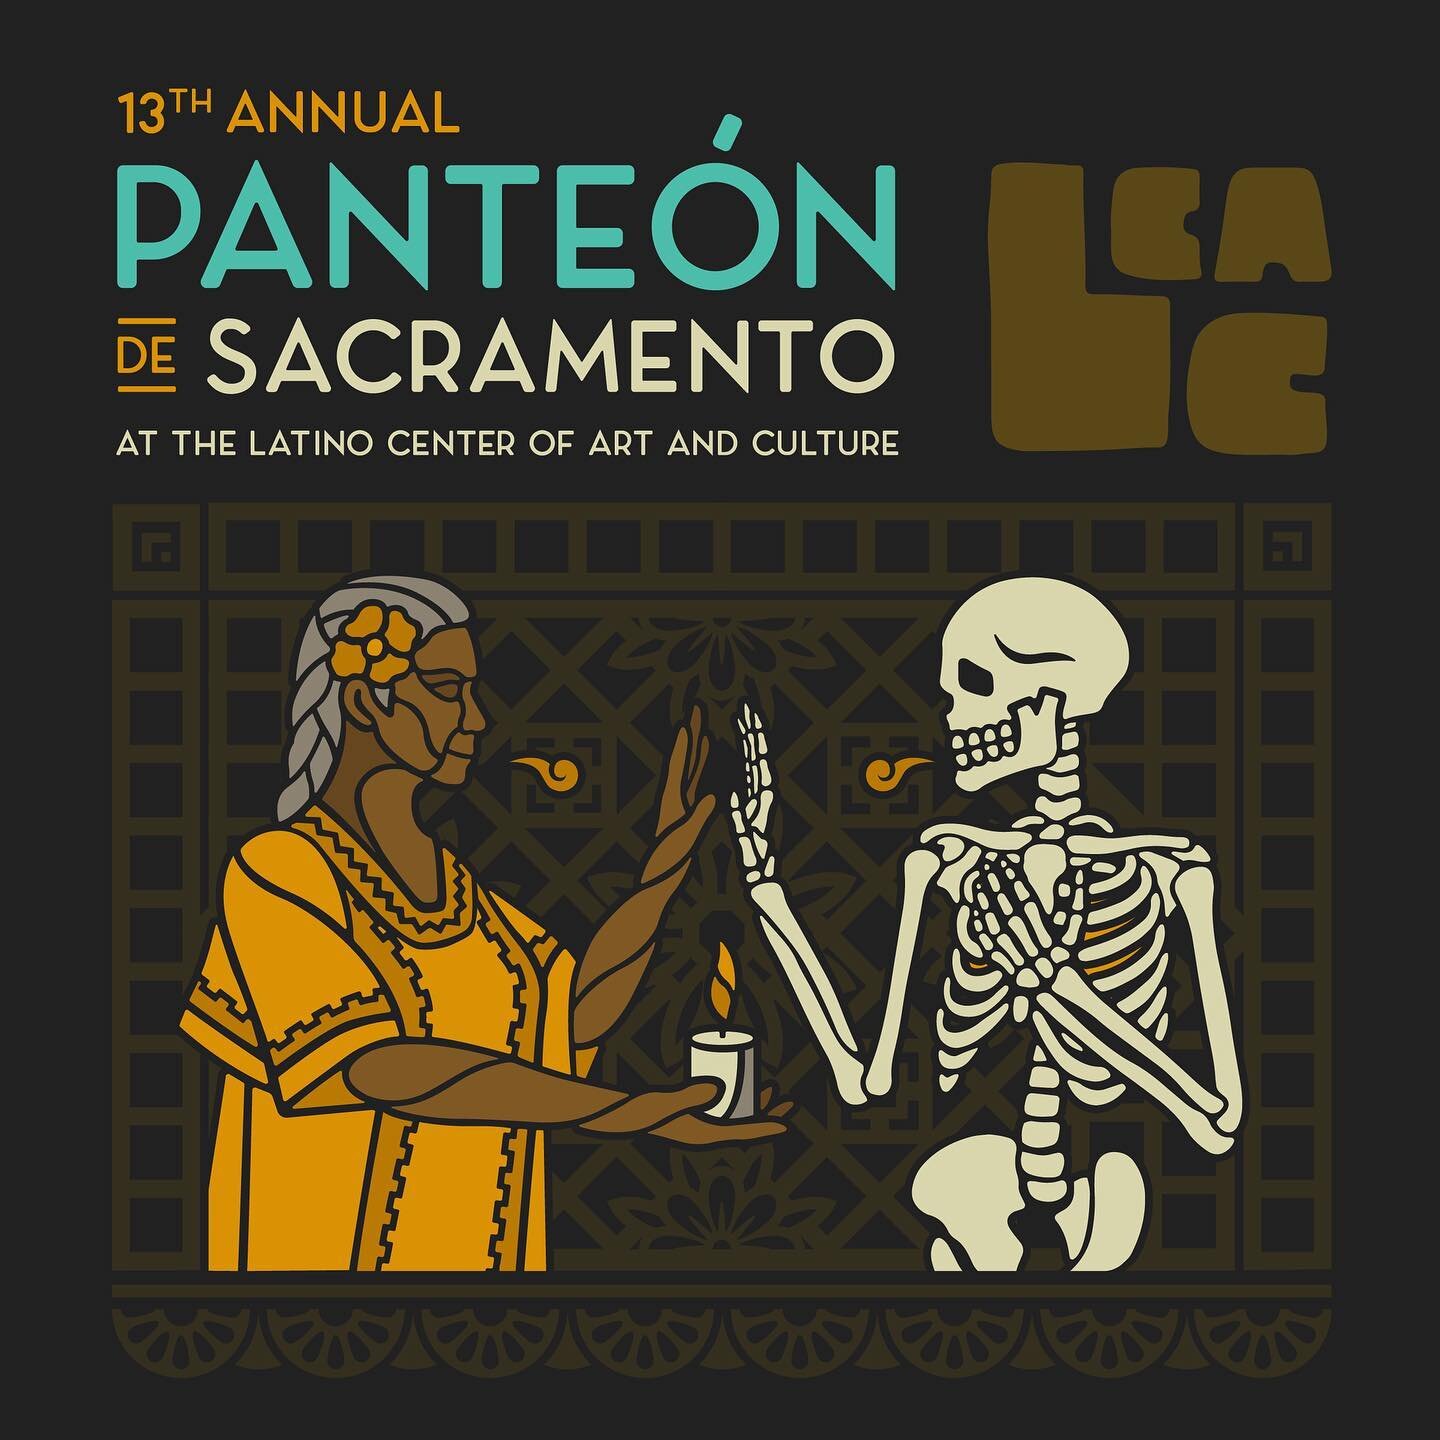 Art and Design for the Pante&oacute;n de Sacramento at the Latino Center of Art and Culture, taking place this coming weekend, October 28-30th. We had the opportunity to create the poster for the Pante&oacute;n back in 2017 so it was an honor to get 